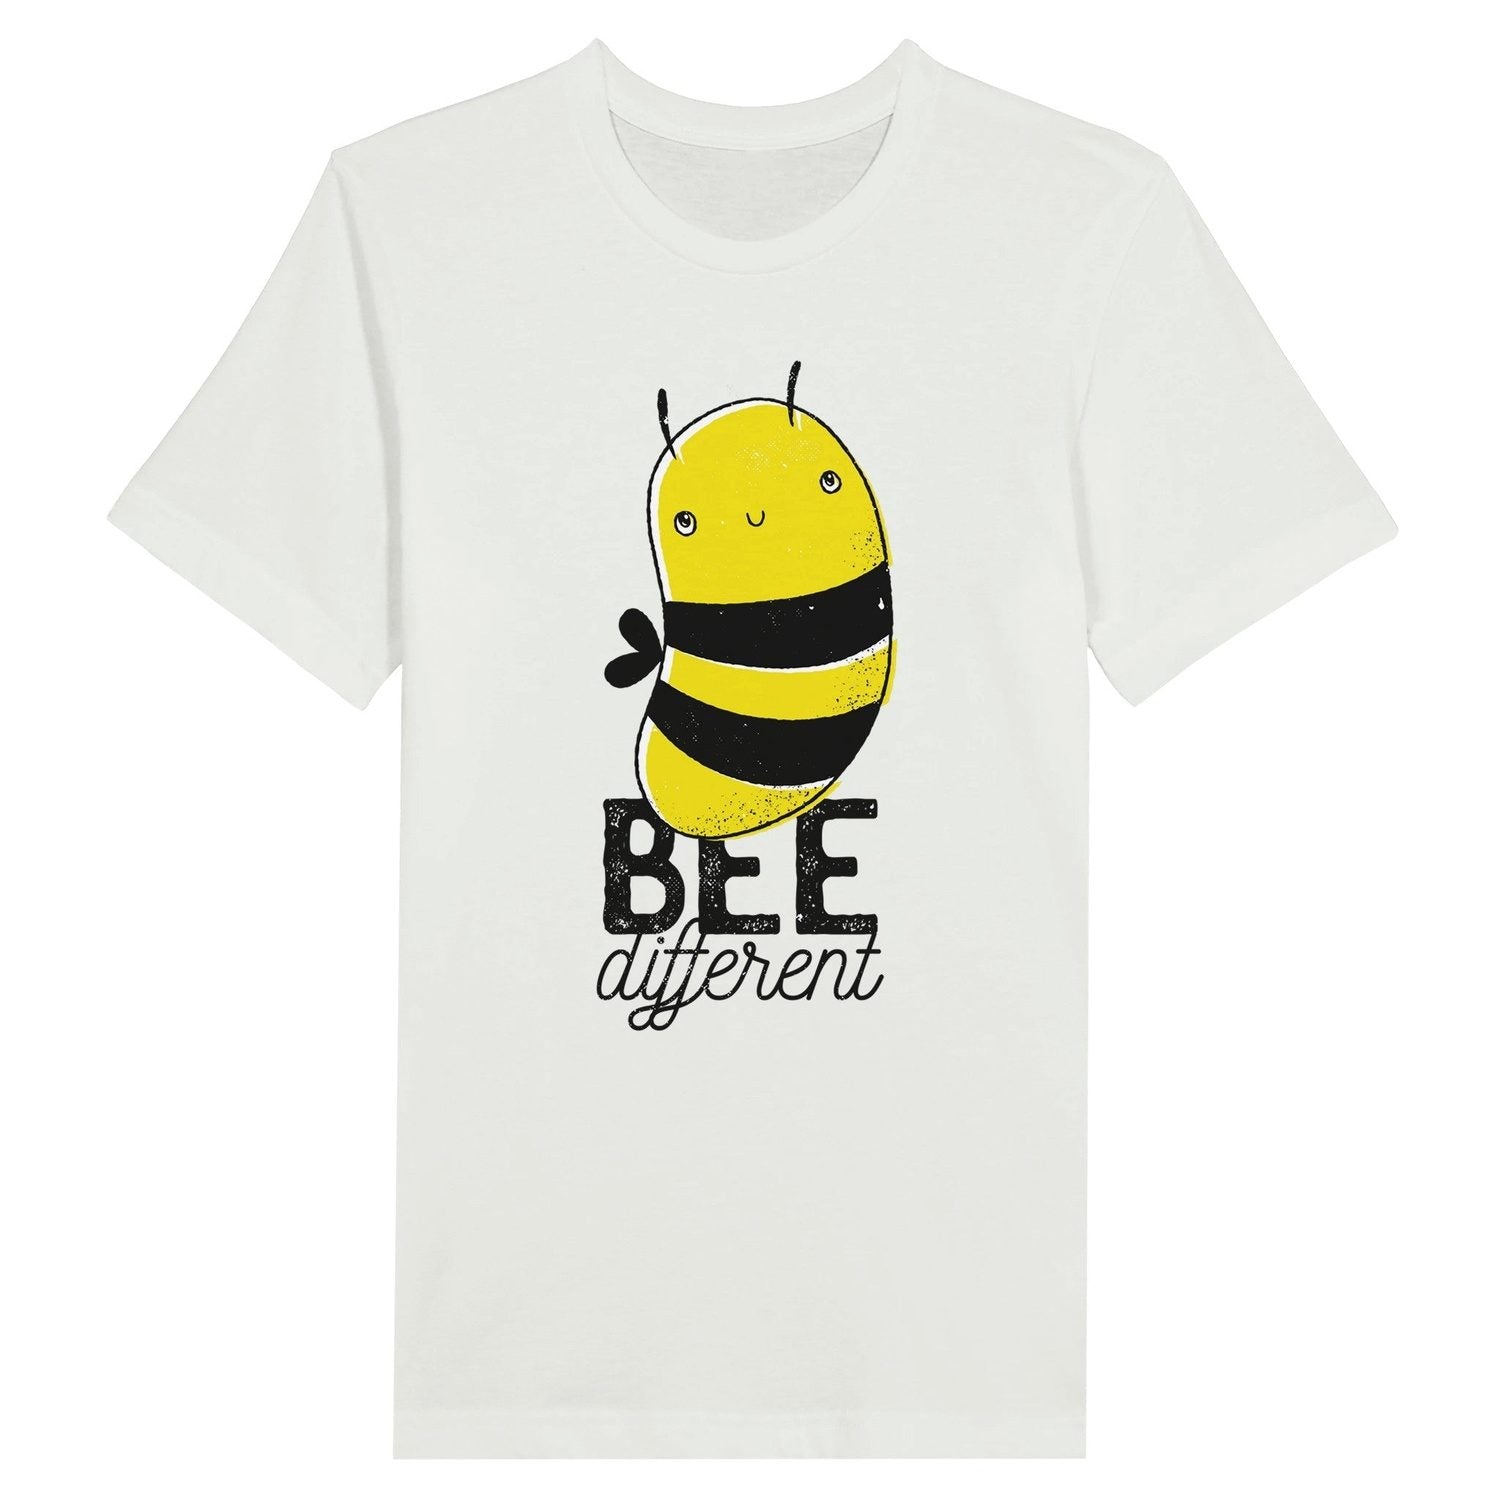 An image of Bee Different | Premium Unisex Inspirational T-shirt available at 3rd Day Christian Clothing UK